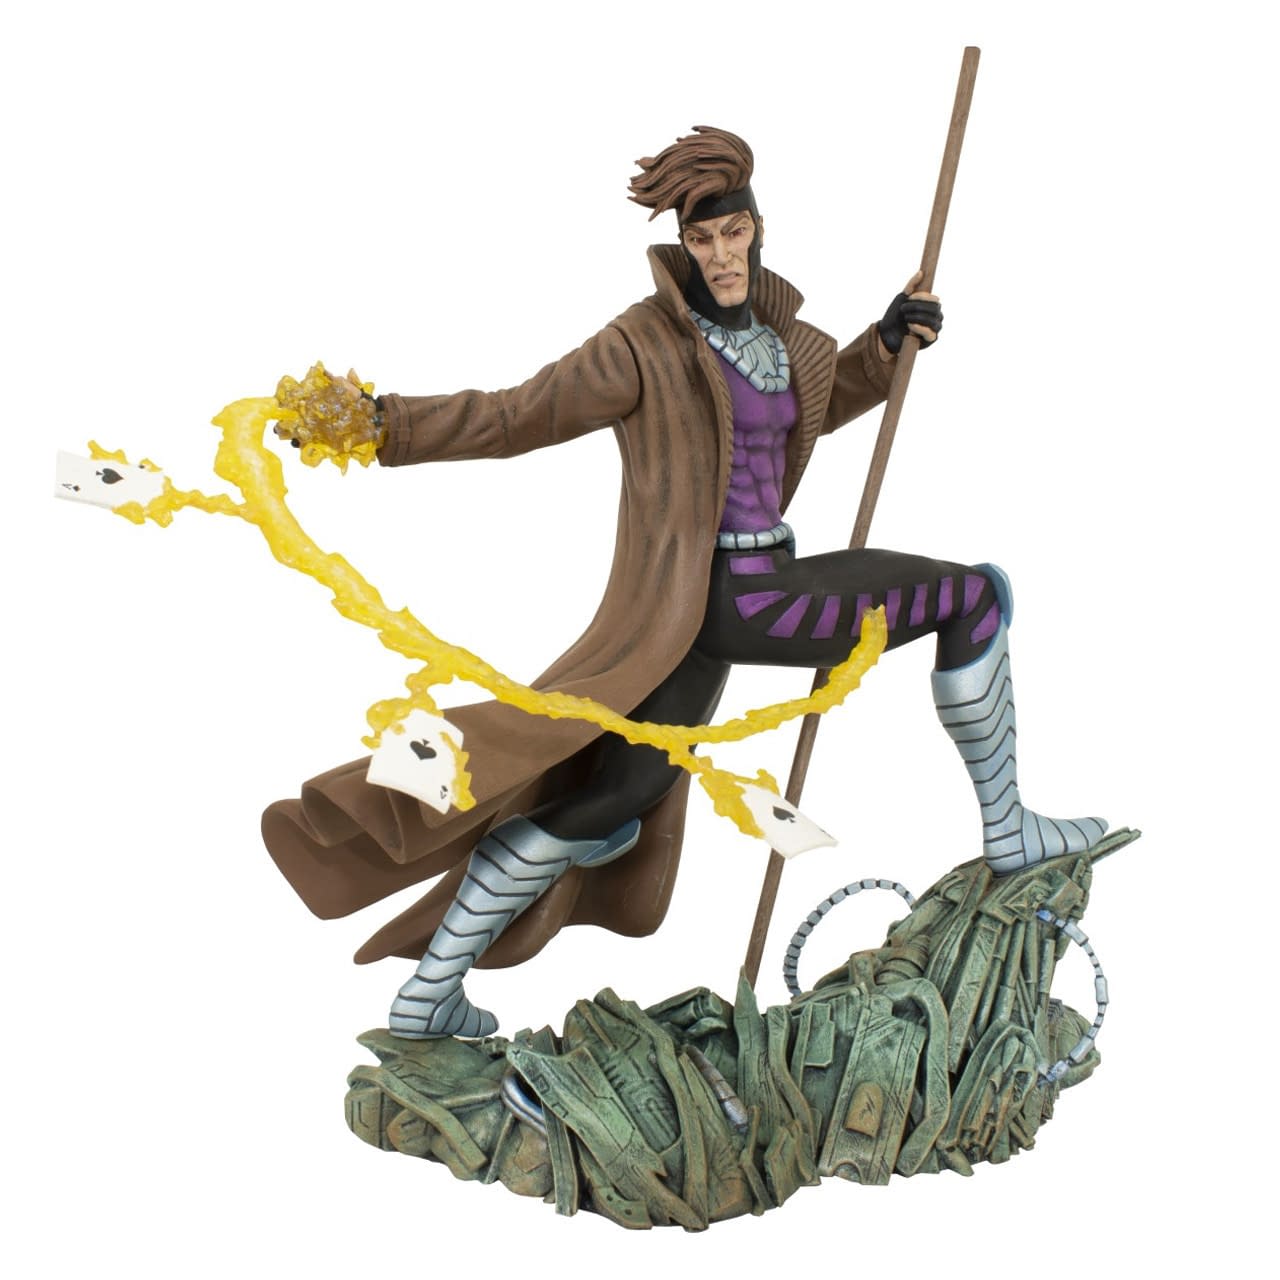 New Marvel Statues Hit Diamond Select with Blade, Gambit, and Star-Lord